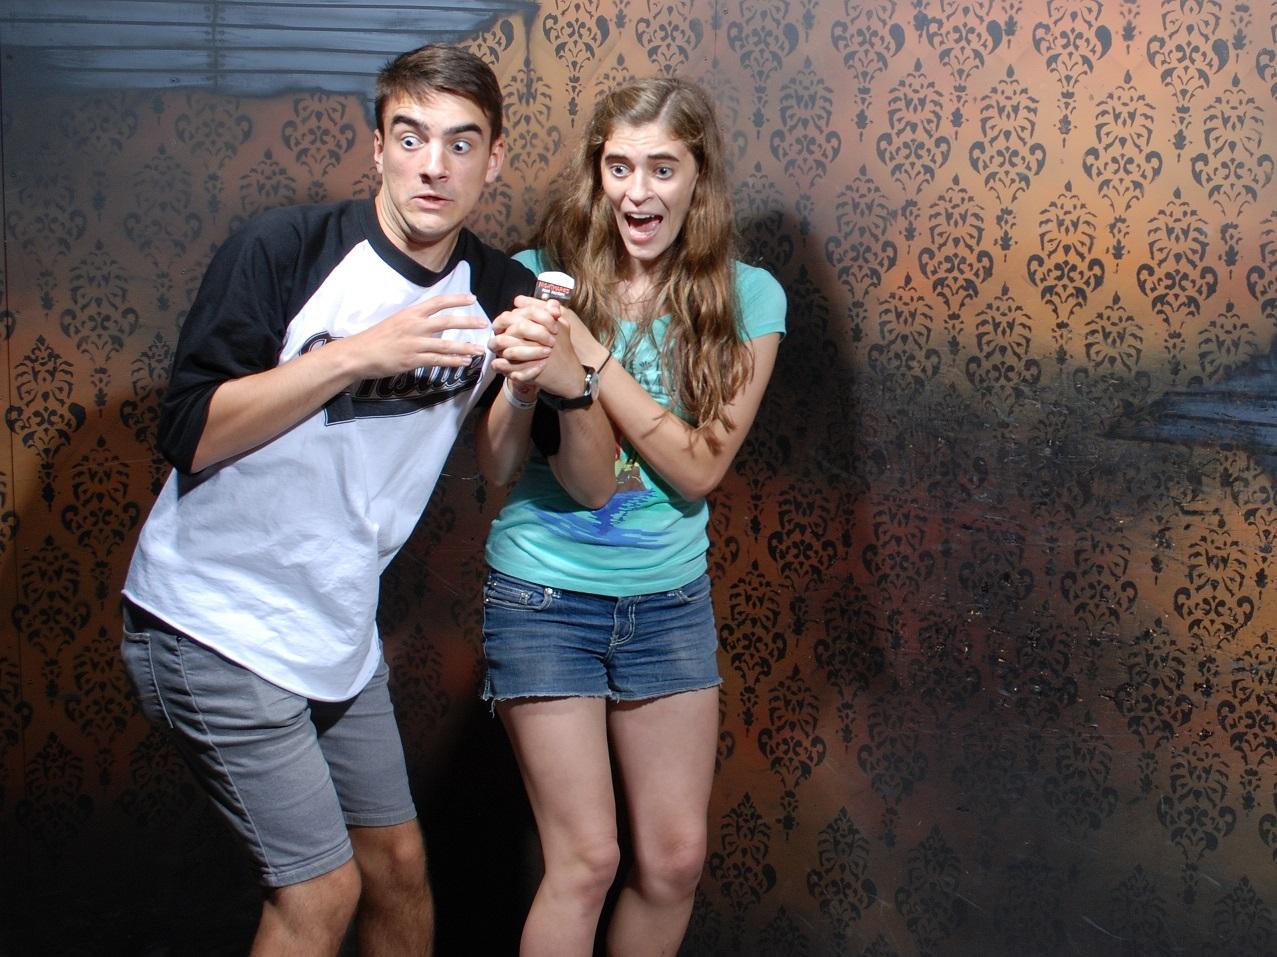 Top 10 FEAR Pics for the week of September 23, 2014 | Nightmares Fear Factory1277 x 957